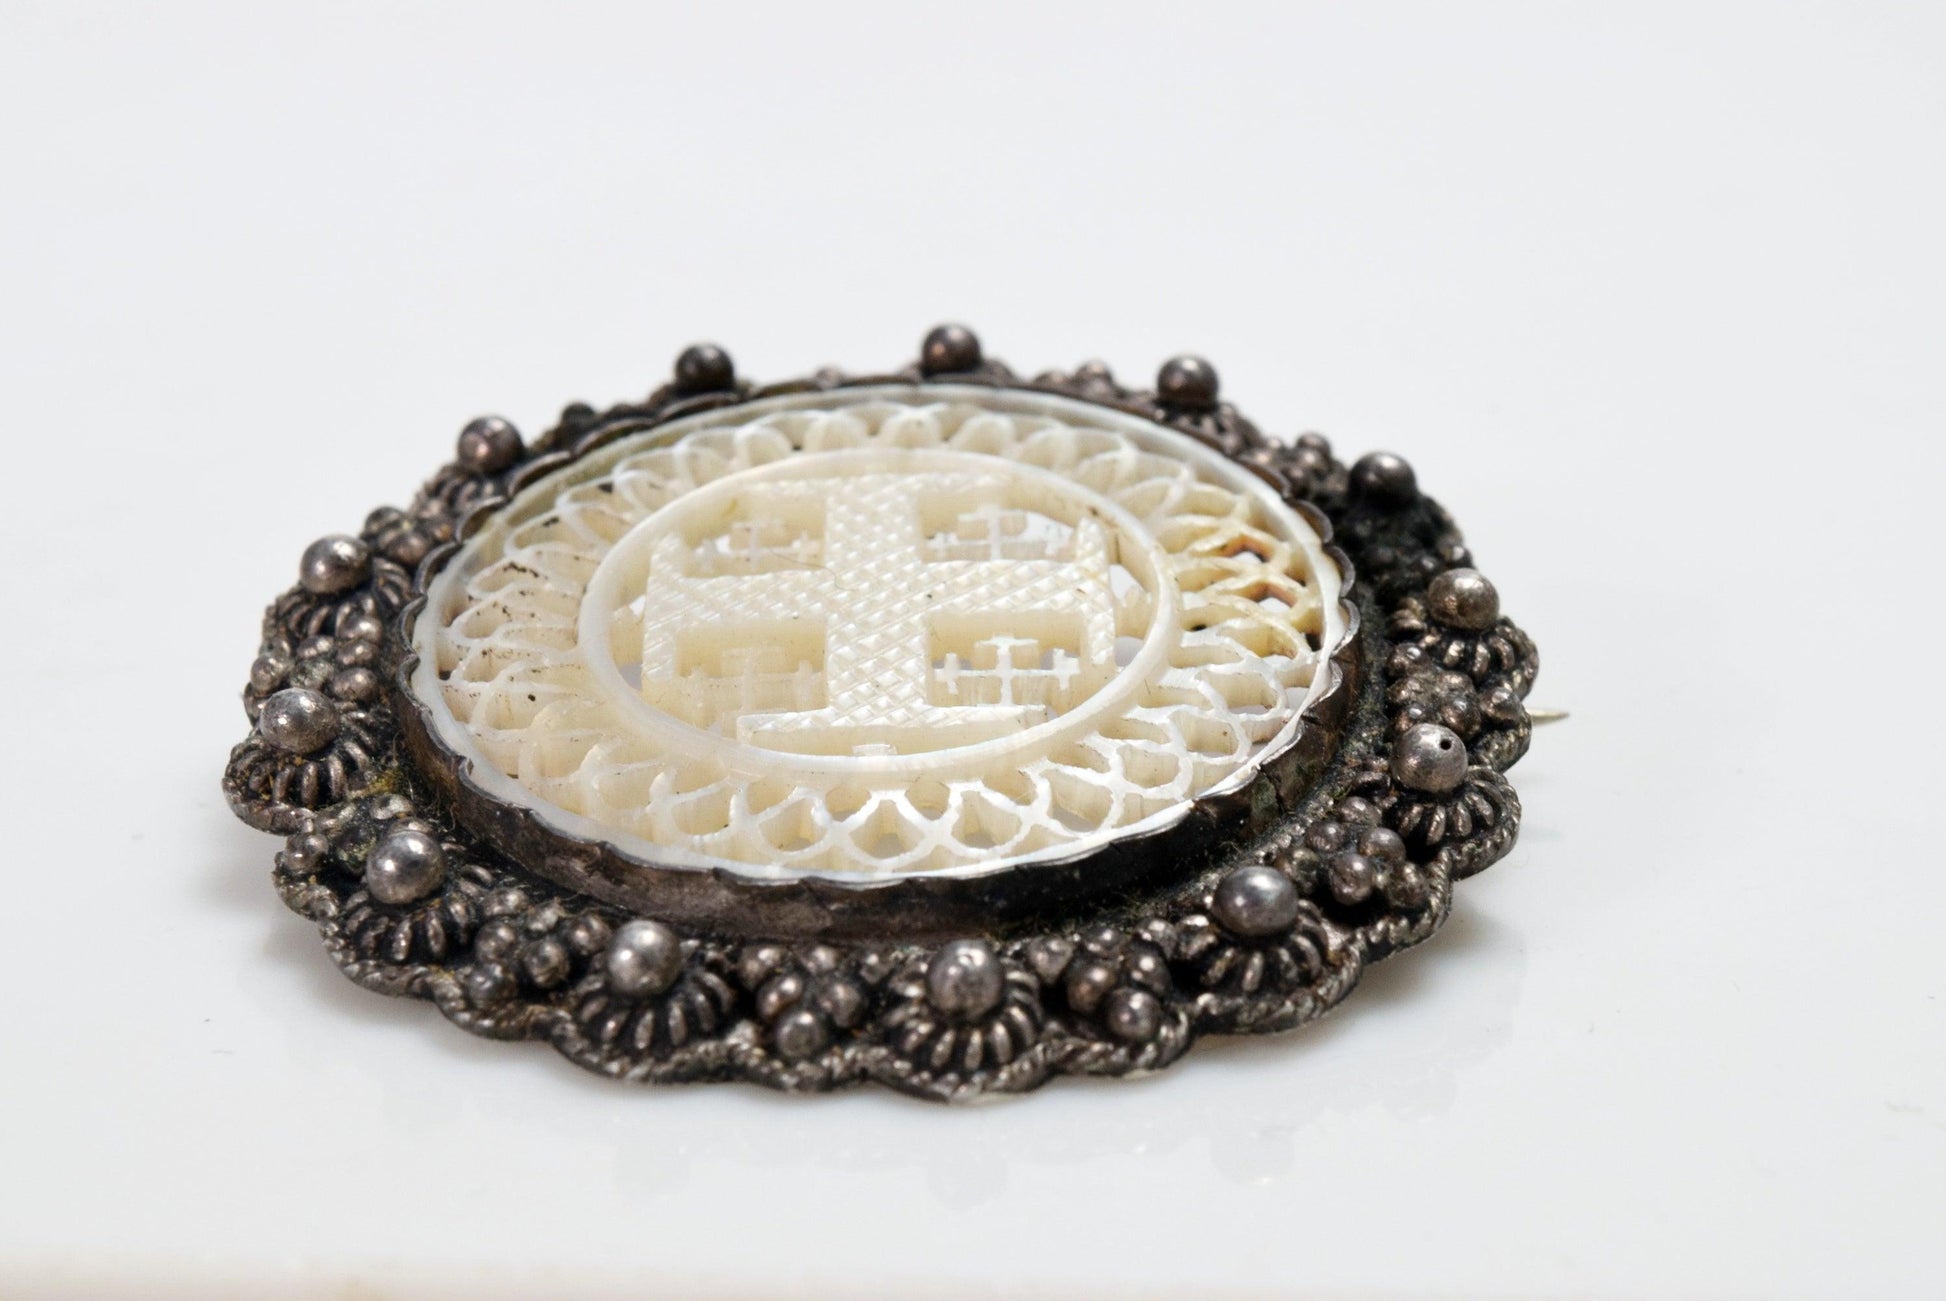 Vintage Silver and Carved Mother of Pearl Cross Brooch or Pendant From the Holy Land - Anteeka